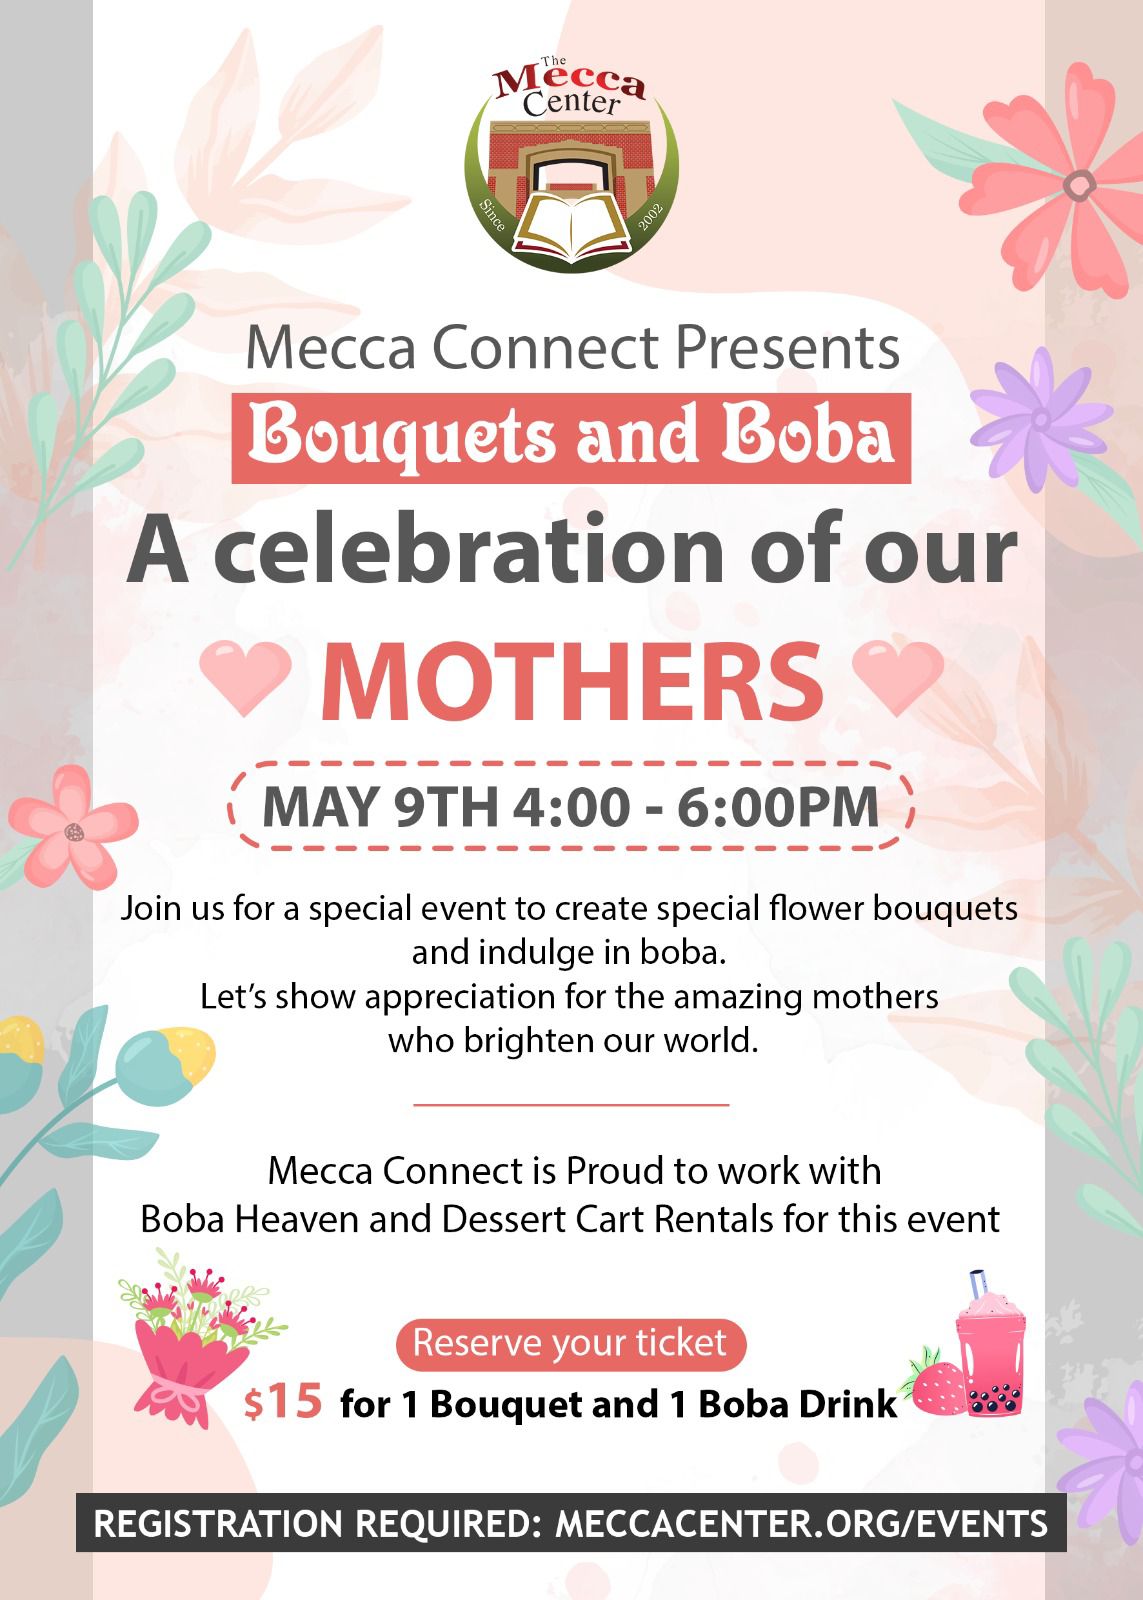 Bouquets and Boba: Celebrating Our Mothers with Mecca Connect